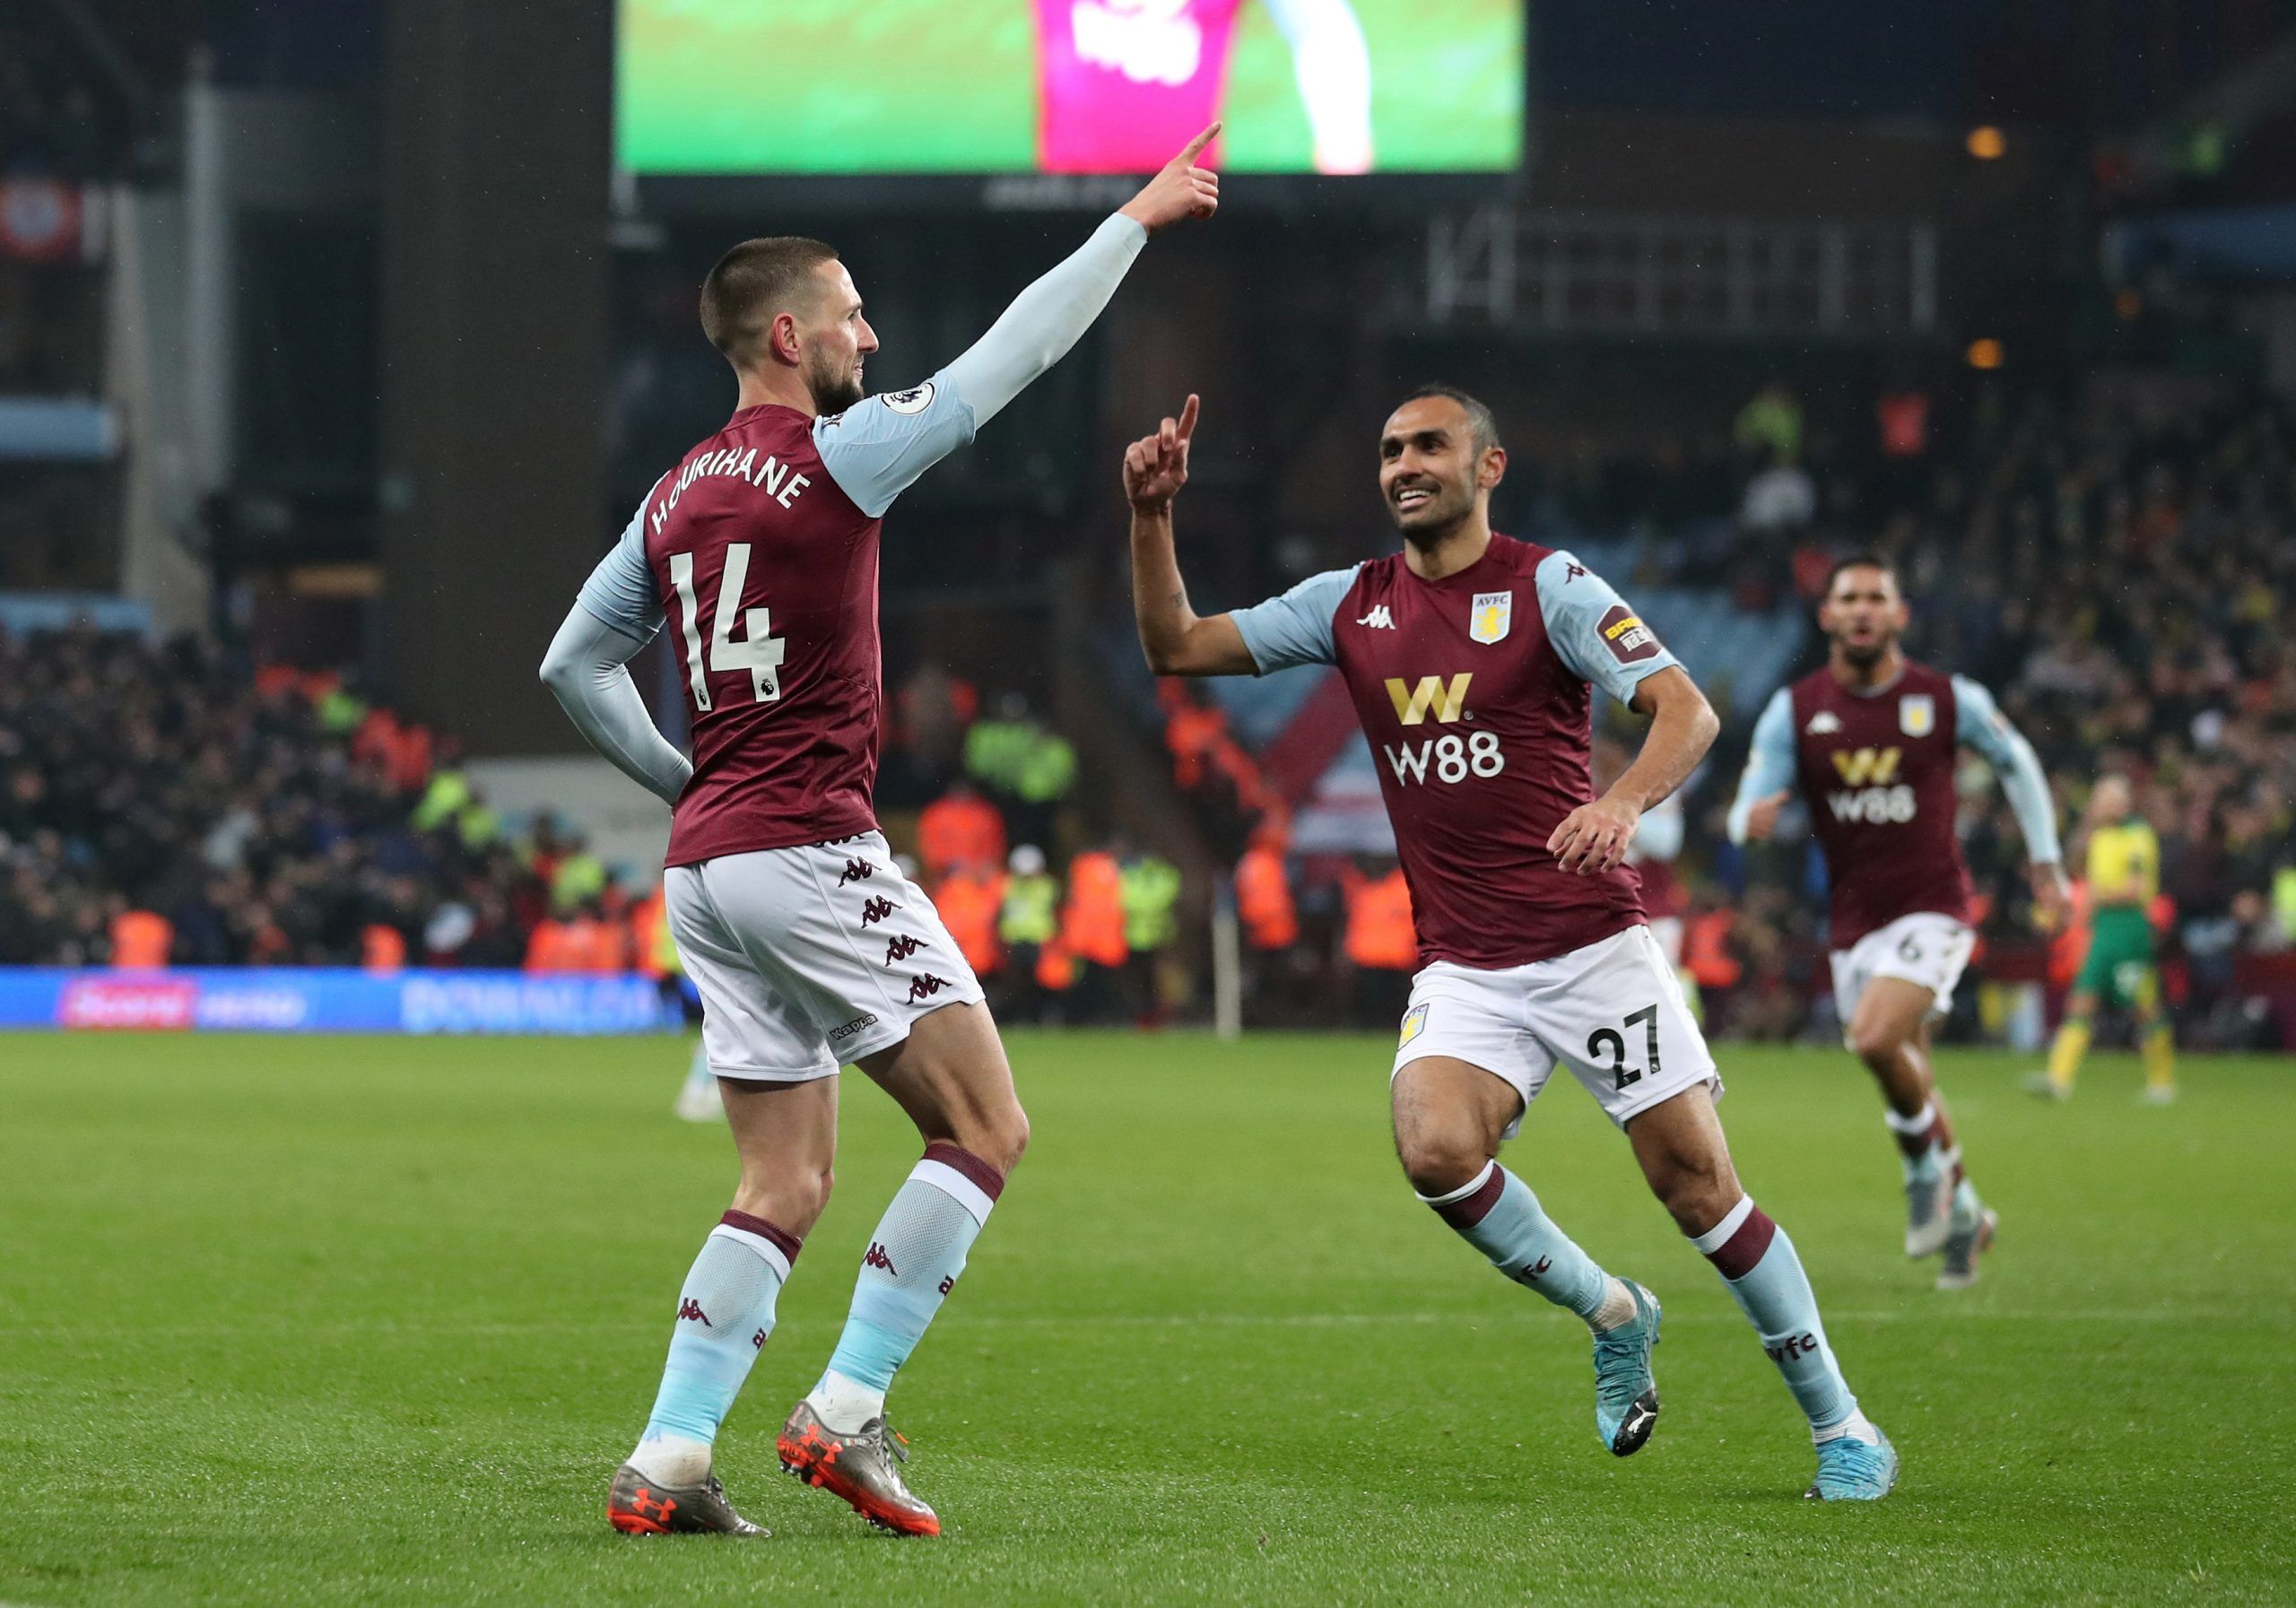 Soccer Football - Premier League - Aston Villa v Norwich City - Villa Park, Birmingham, Britain - December 26, 2019  Aston Villa's Conor Hourihane celebrates scoring their first goal with Ahmed Elmohamady  REUTERS/Jon Super  EDITORIAL USE ONLY. No use with unauthorized audio, video, data, fixture lists, club/league logos or 